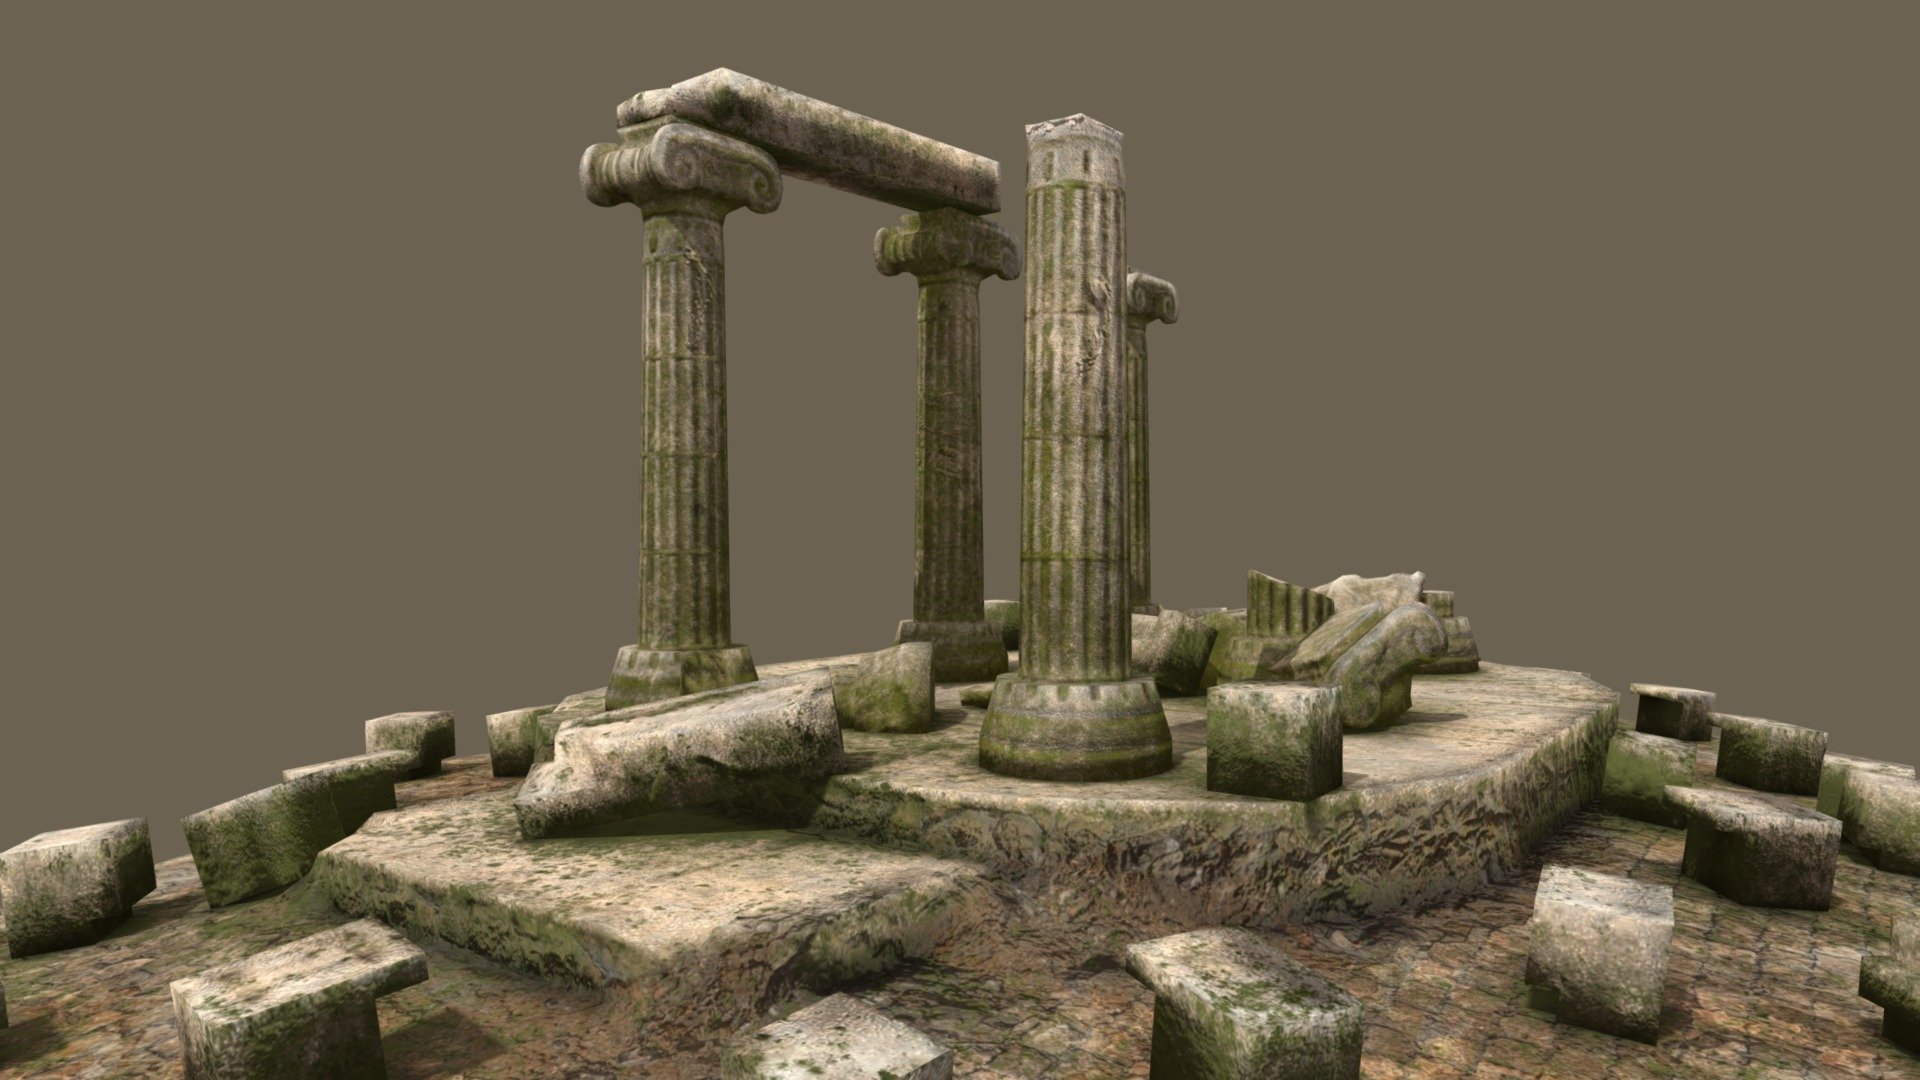 Original creation of ruined Ionic Greek columns.
This model is ideal for integration into a video game.
For any further information, contact me here &ldquo;jc.perret@yahoo.fr